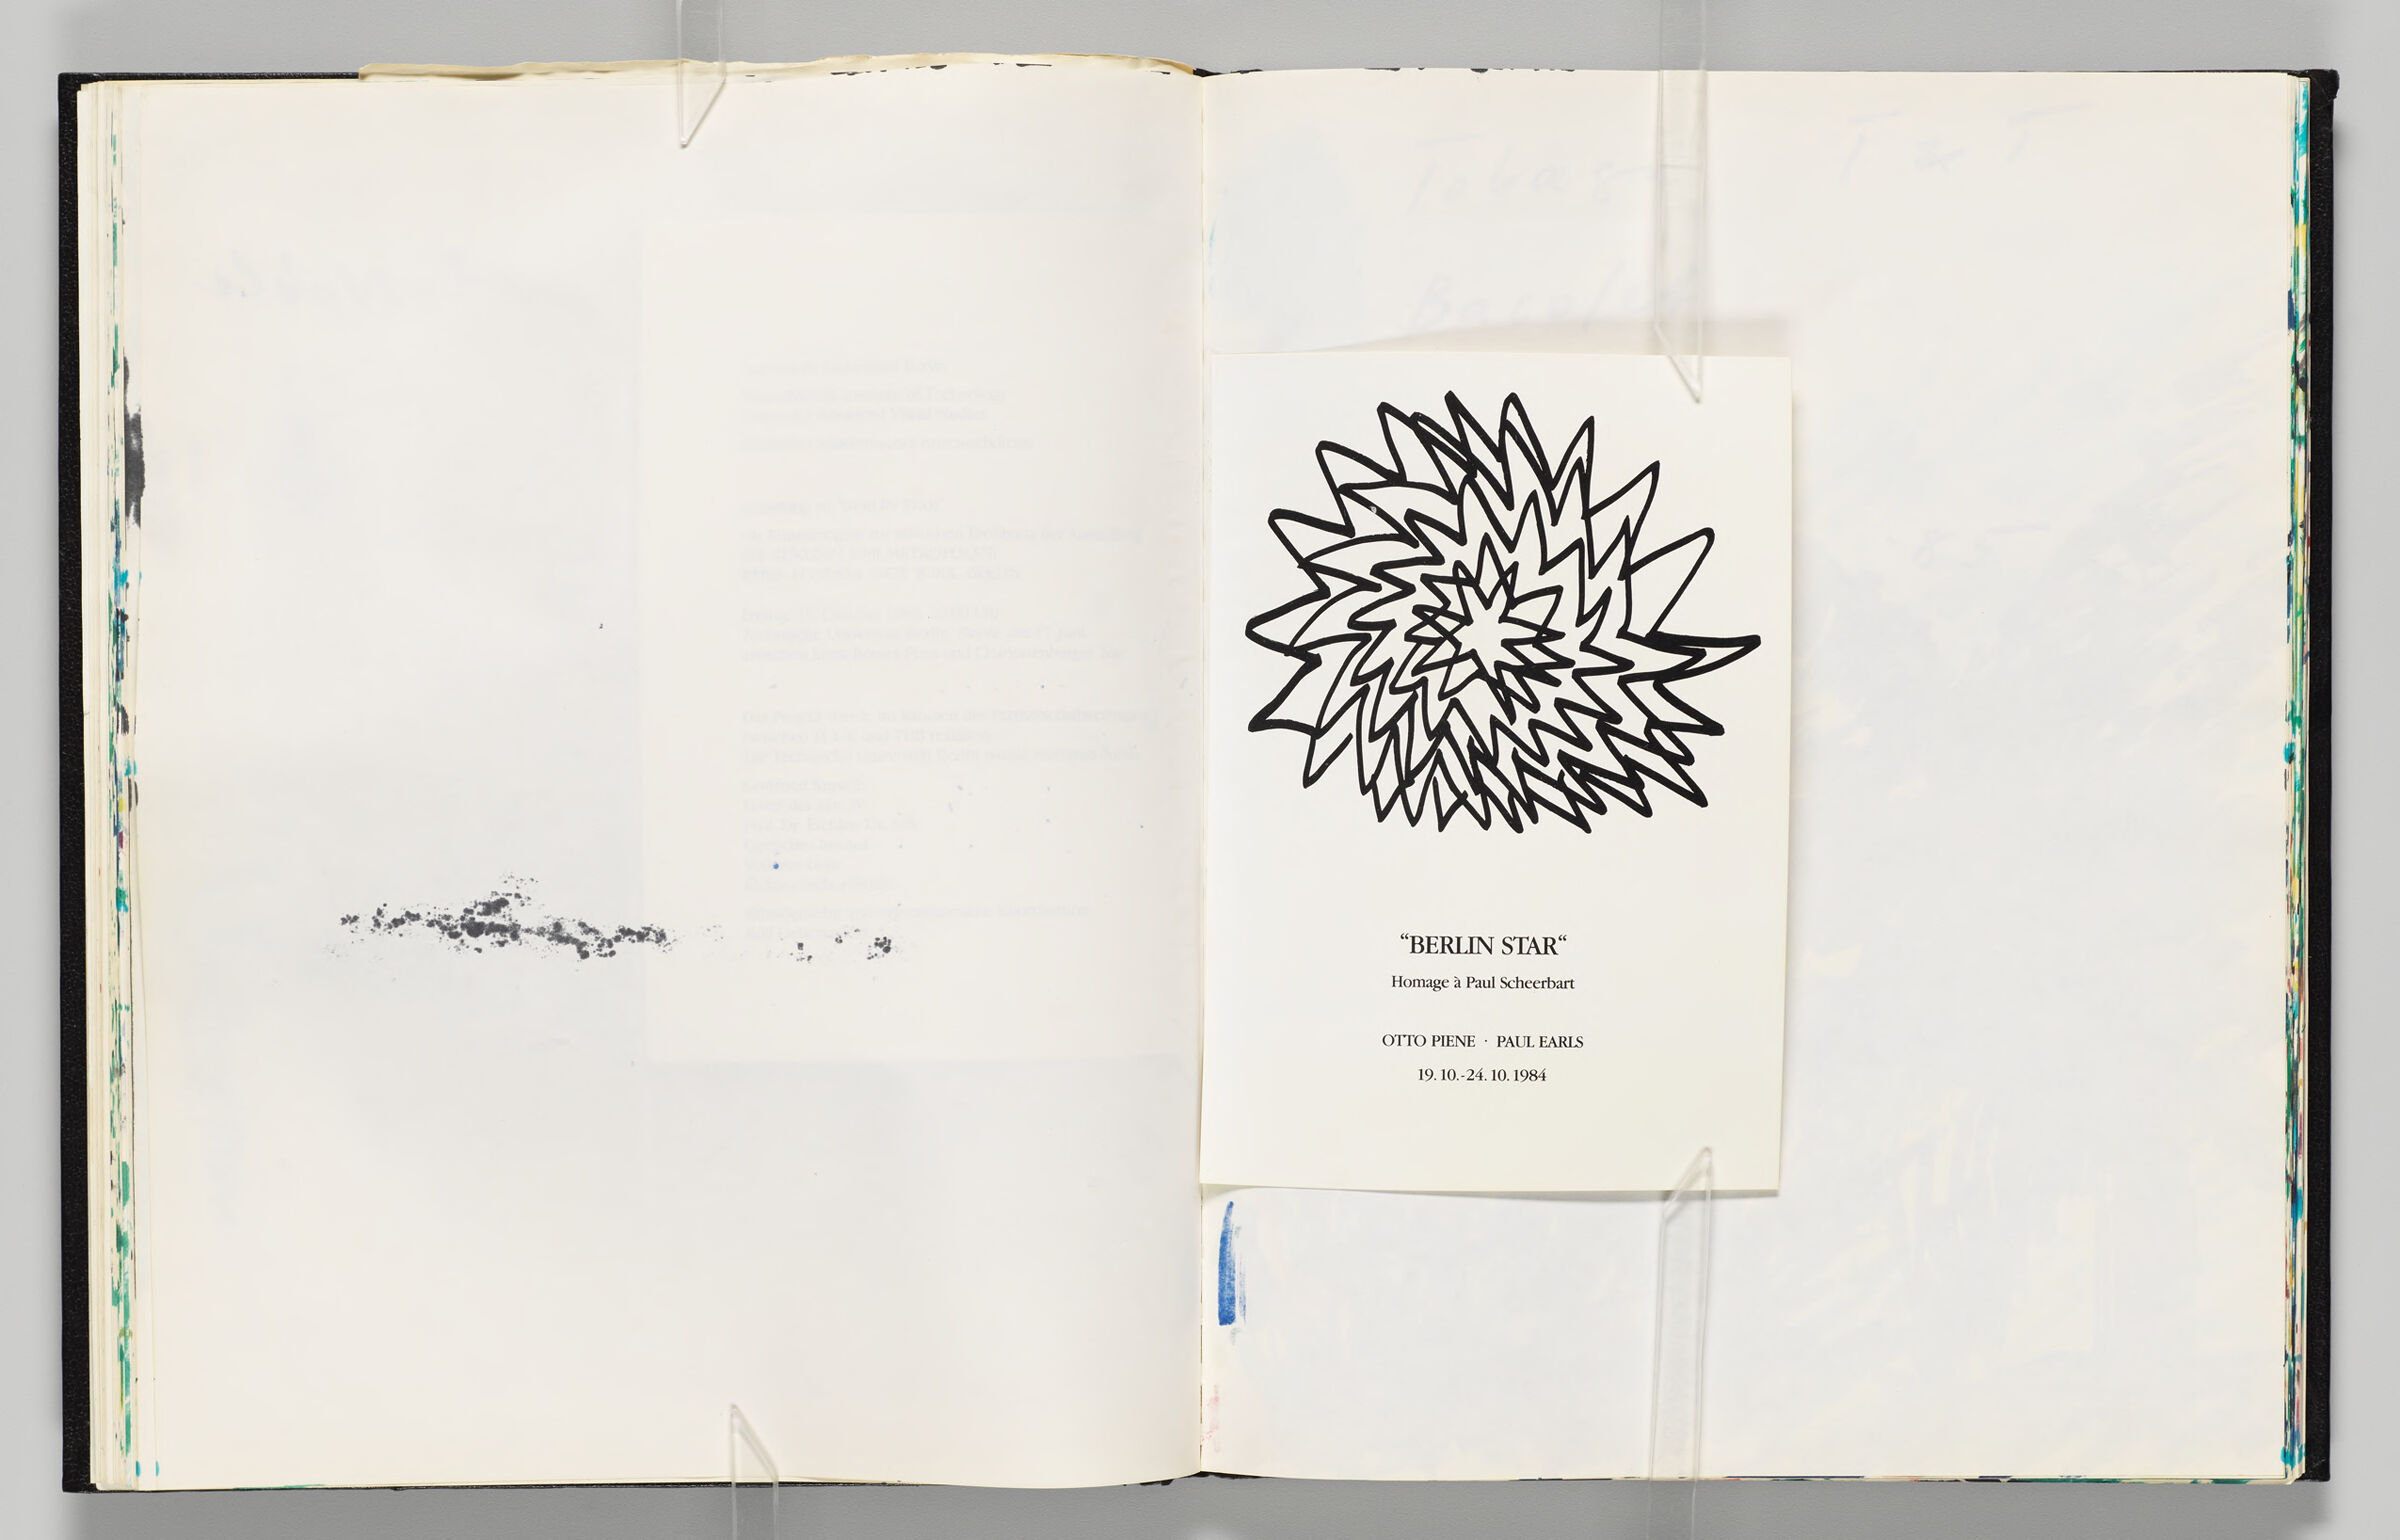 Untitled (Color Transfer, Left Page); Untitled (Blank With Pasted-In Invitation, Right Page)